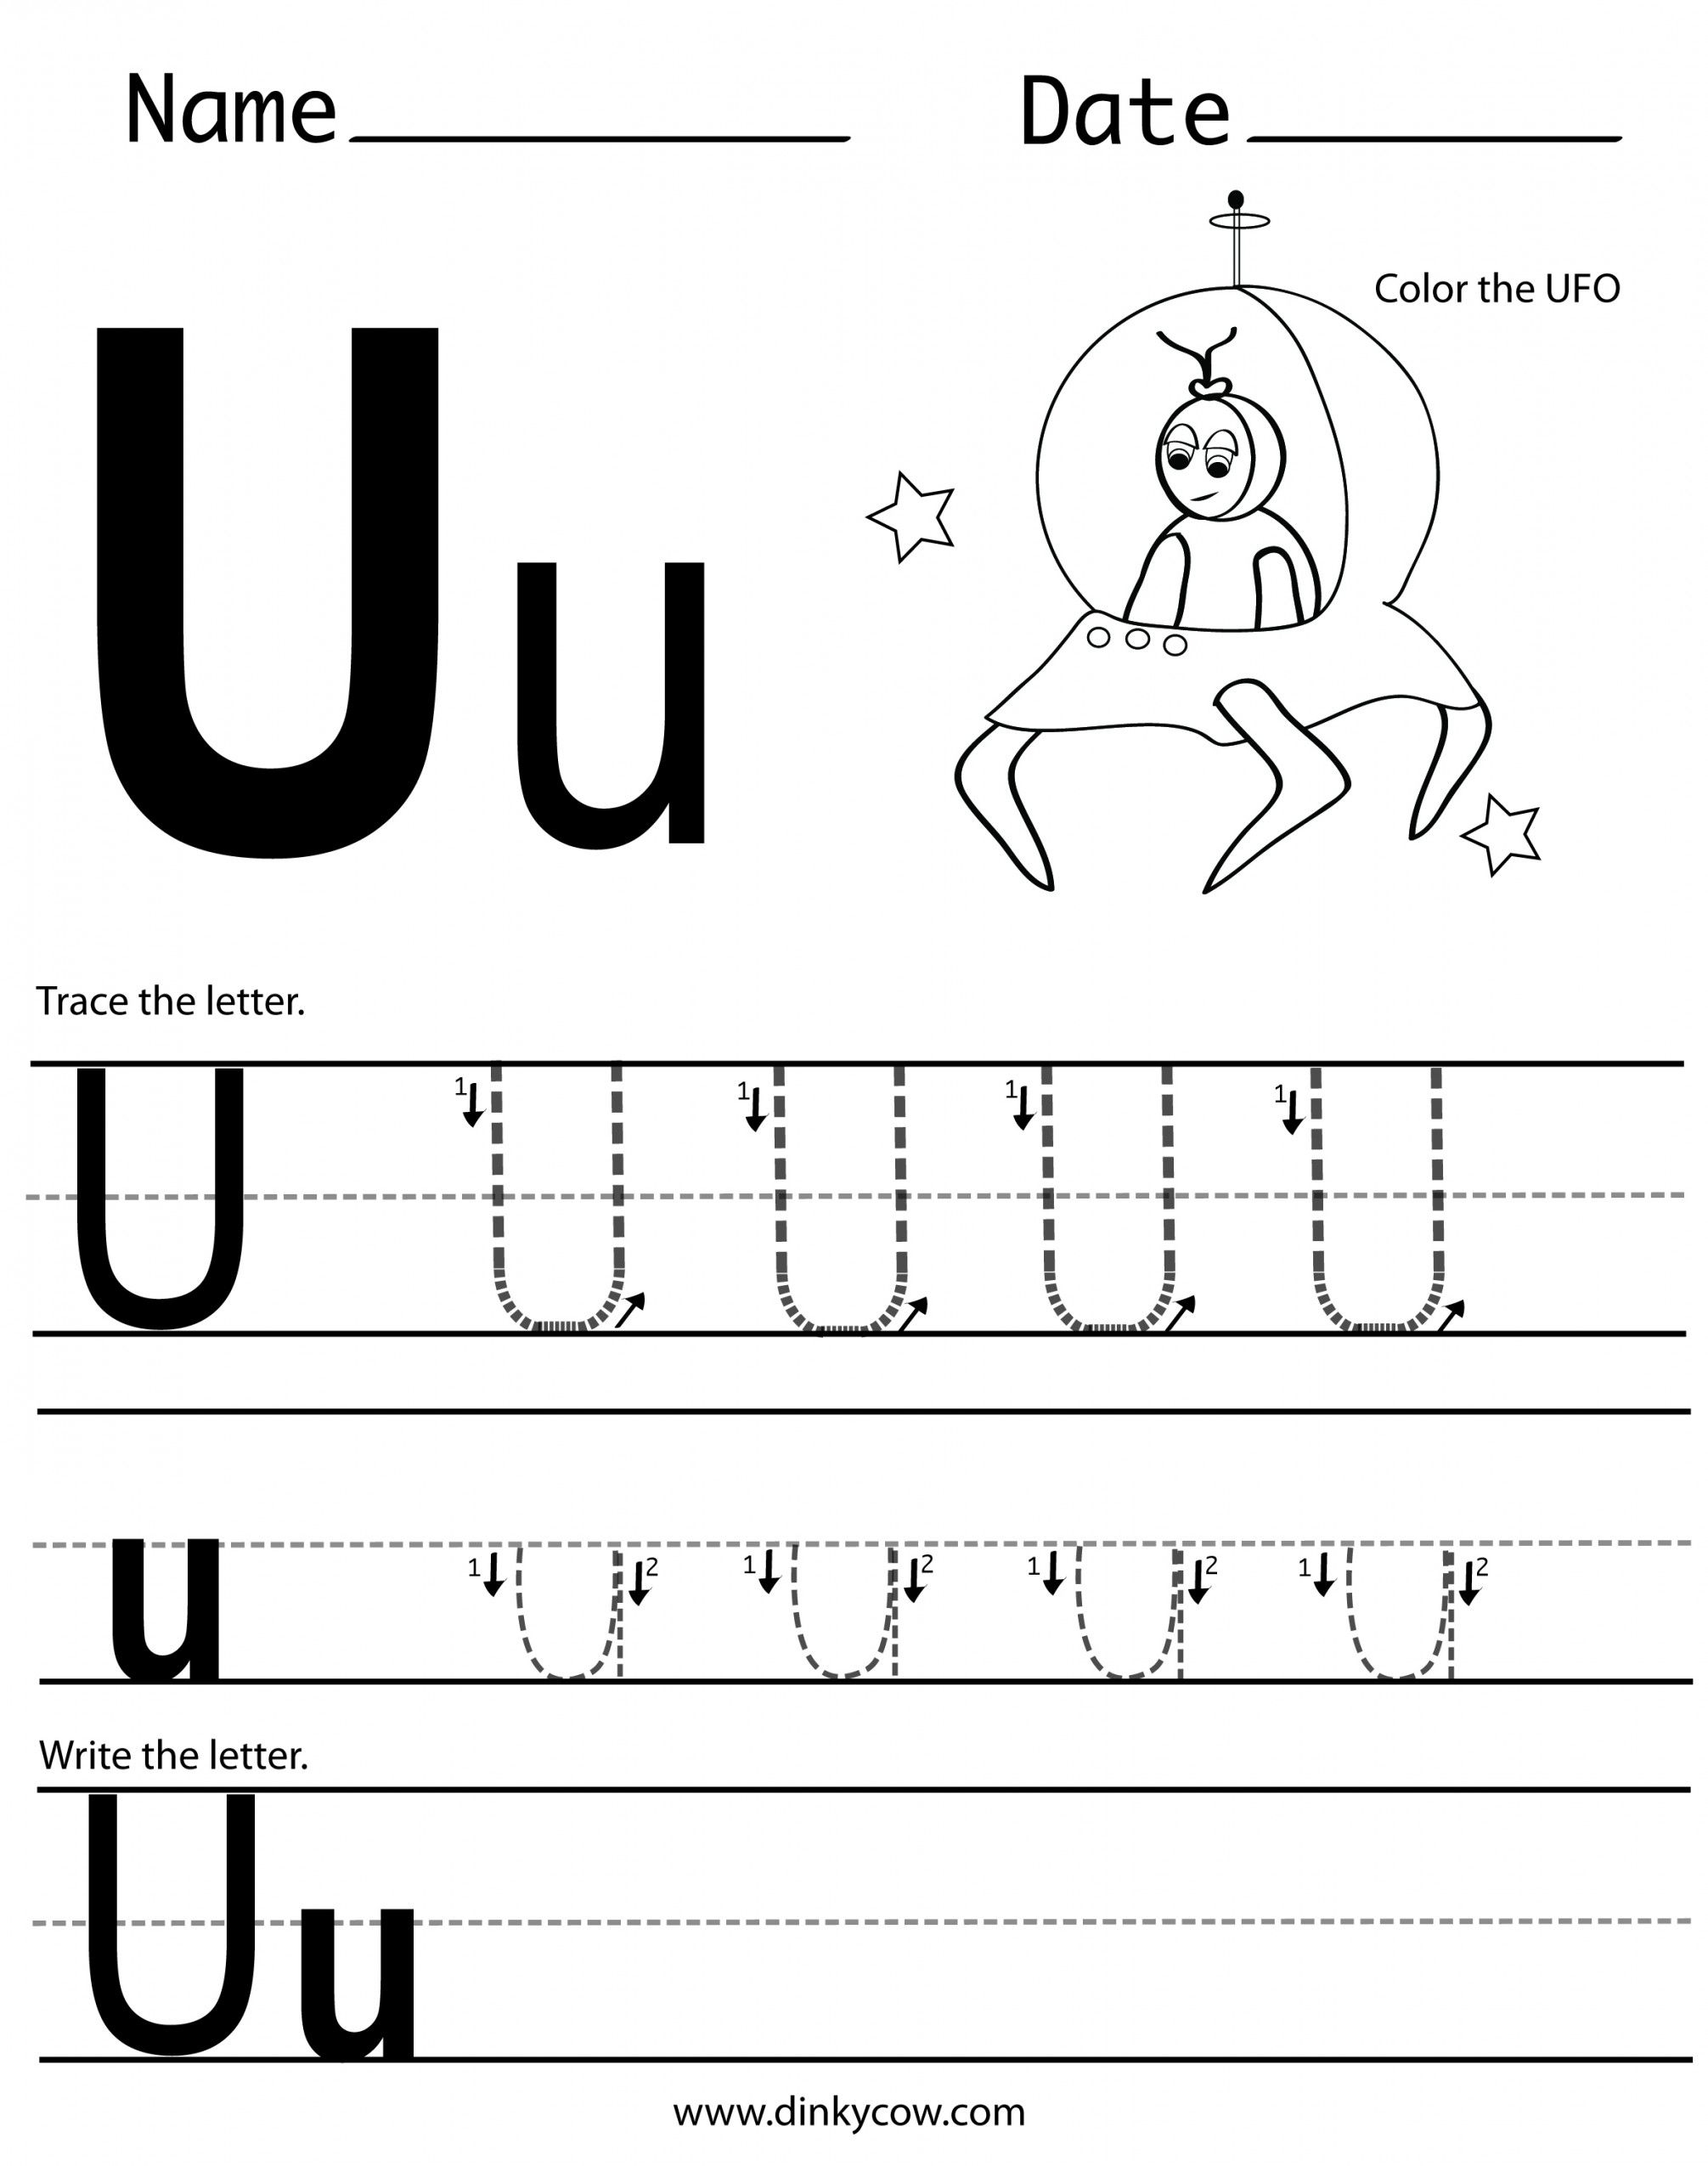 12 Letter U Worksheets For Young Learners | Kittybabylove regarding Letter U Worksheets Free Printable